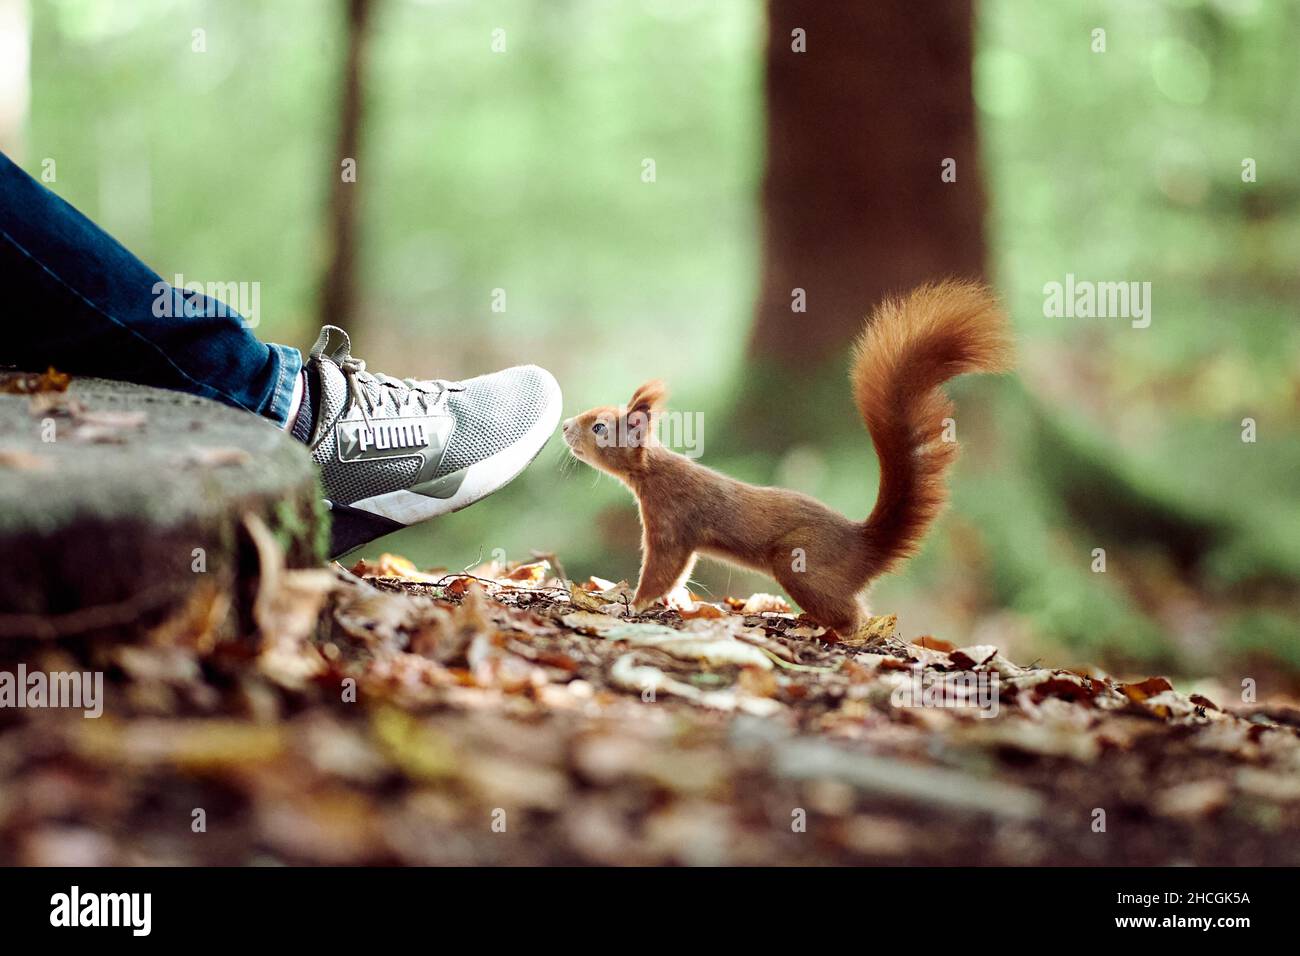 Small cute squirrel sniffing the sneakers of a person in the Squirrel Forest during the daytime Stock Photo